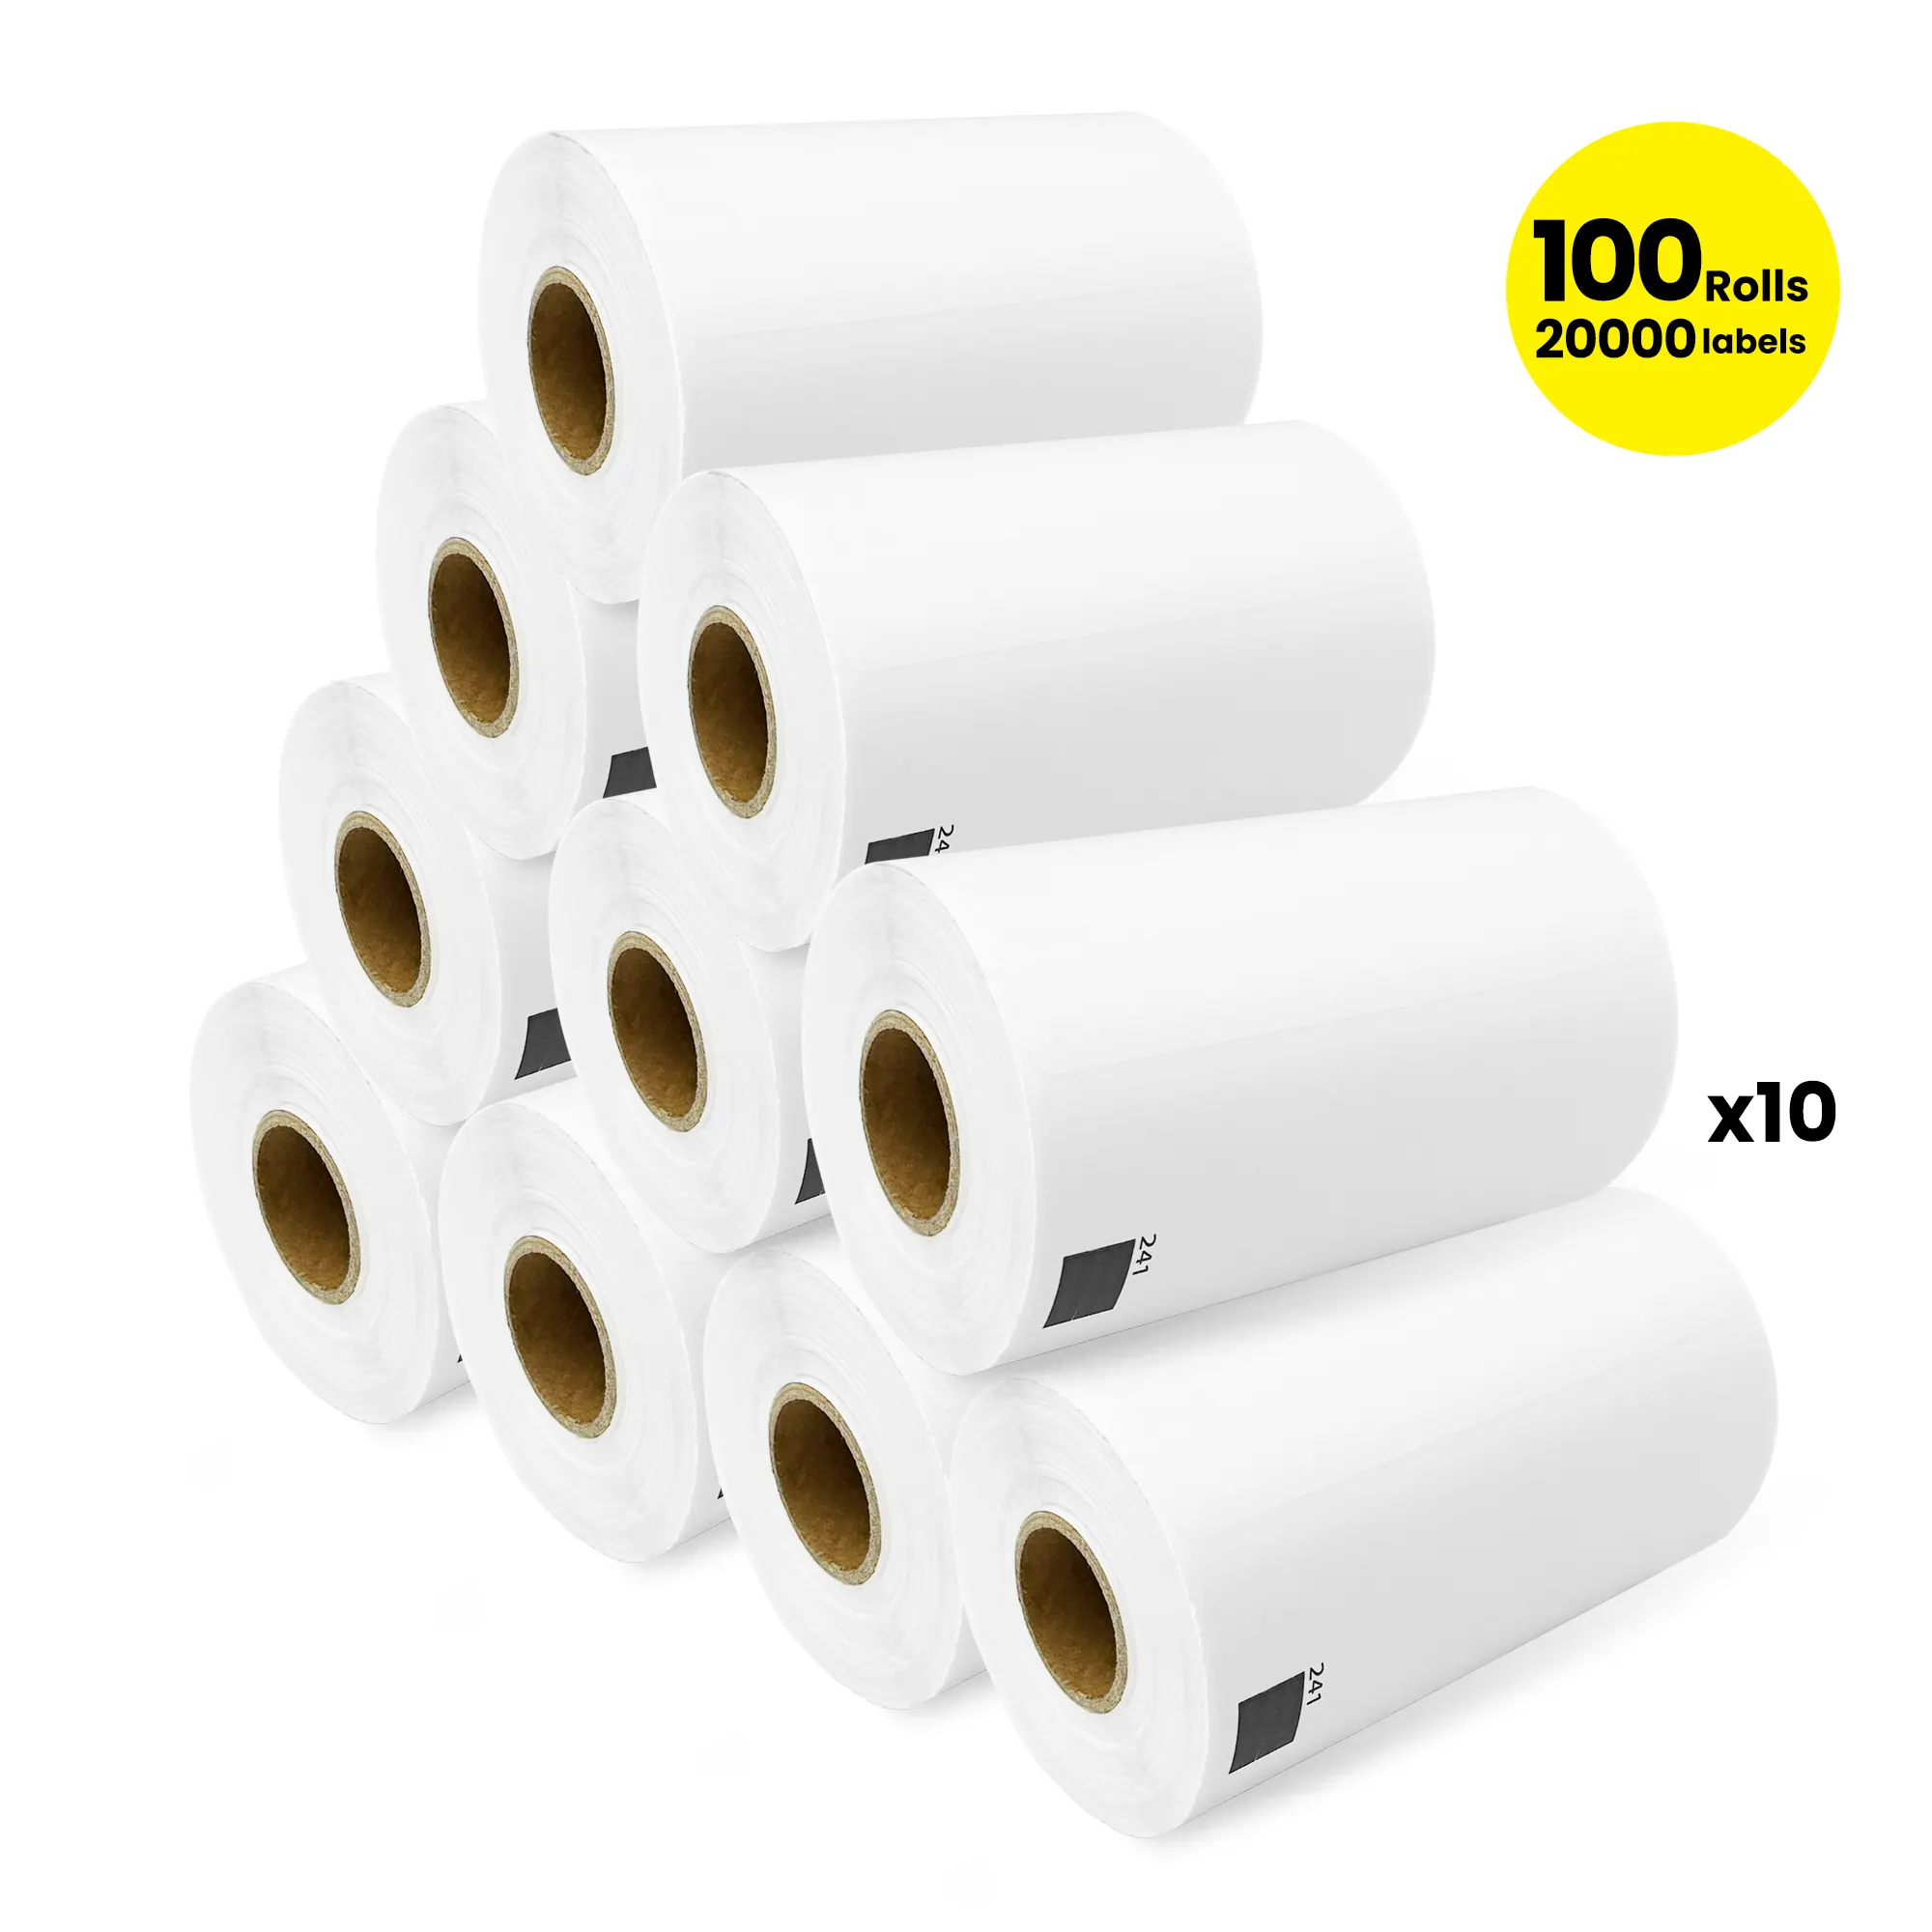 Wholesale Pack of 100 rolls ( 20000 labels) Compatible Brother DK-11241 102mm x 152mm thermal shipping Labels dk1241